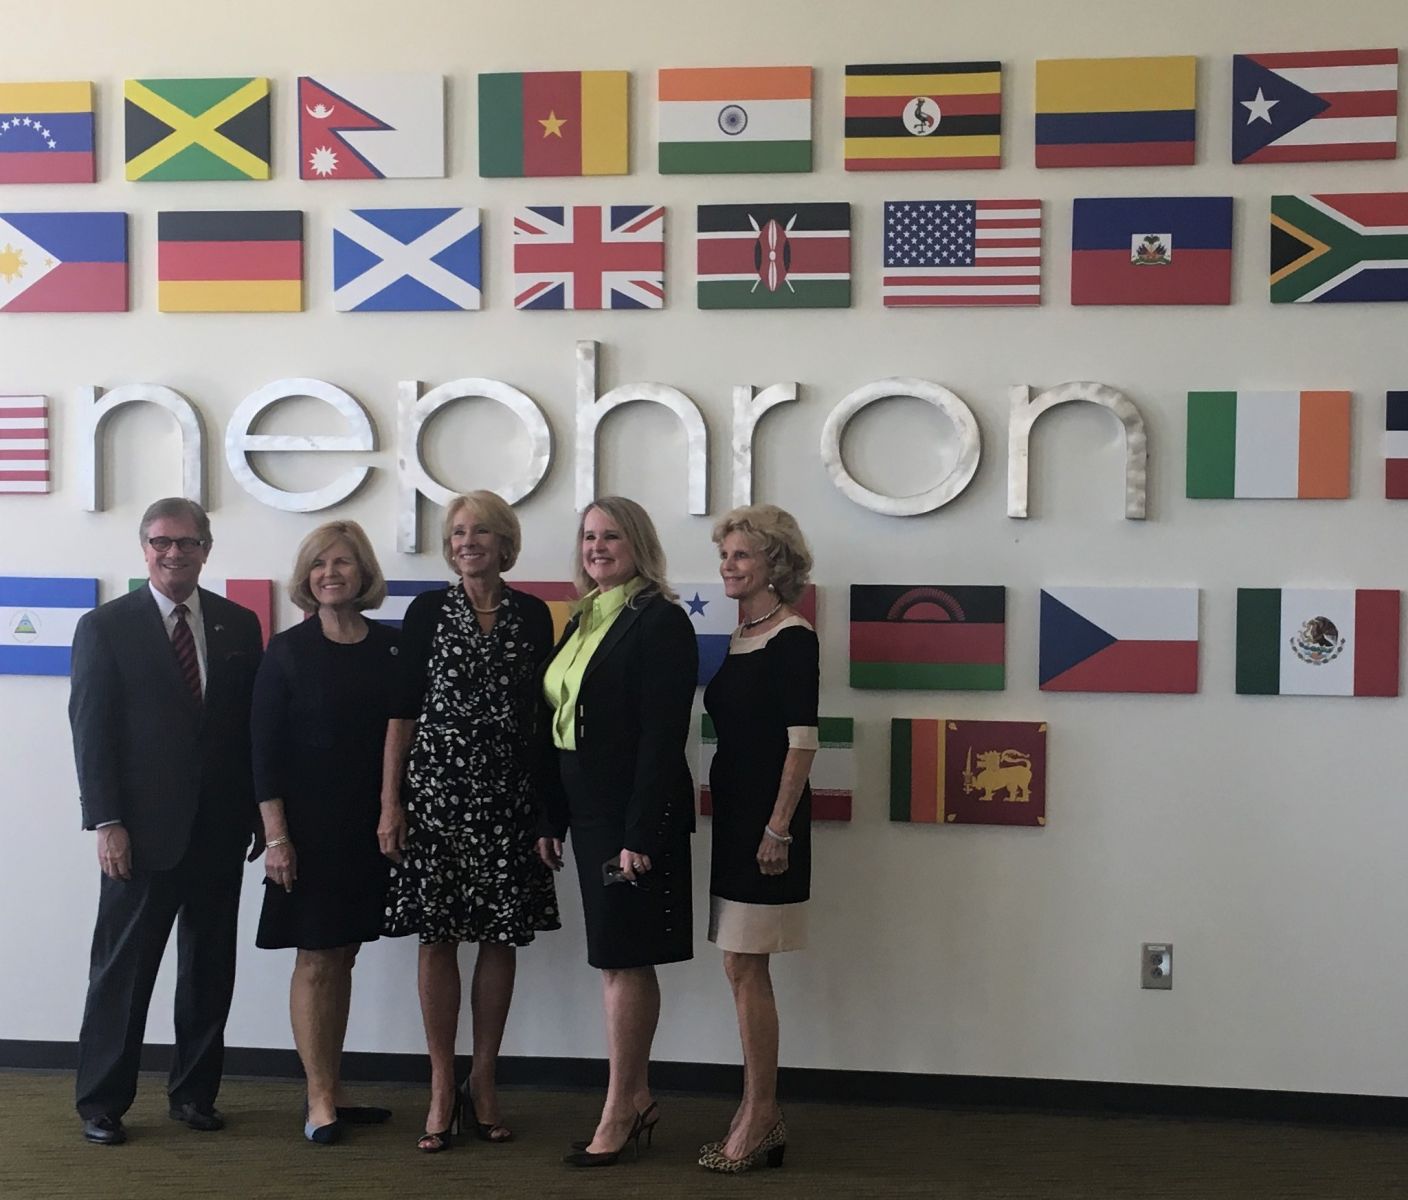 Officials including S.C. Superintendent of Education Molly Spearman (second from left), U.S. Secretary of Education Betsy DeVos, Nephron CEO Lou Kennedy and S.C. first lady Peggy McMaster toured Nephron's West Columbia facility on Thursday. The group posed in front of a lobby display featuring the flags of countries of origin of Nephron employees. (Photo/Renee Sexton)